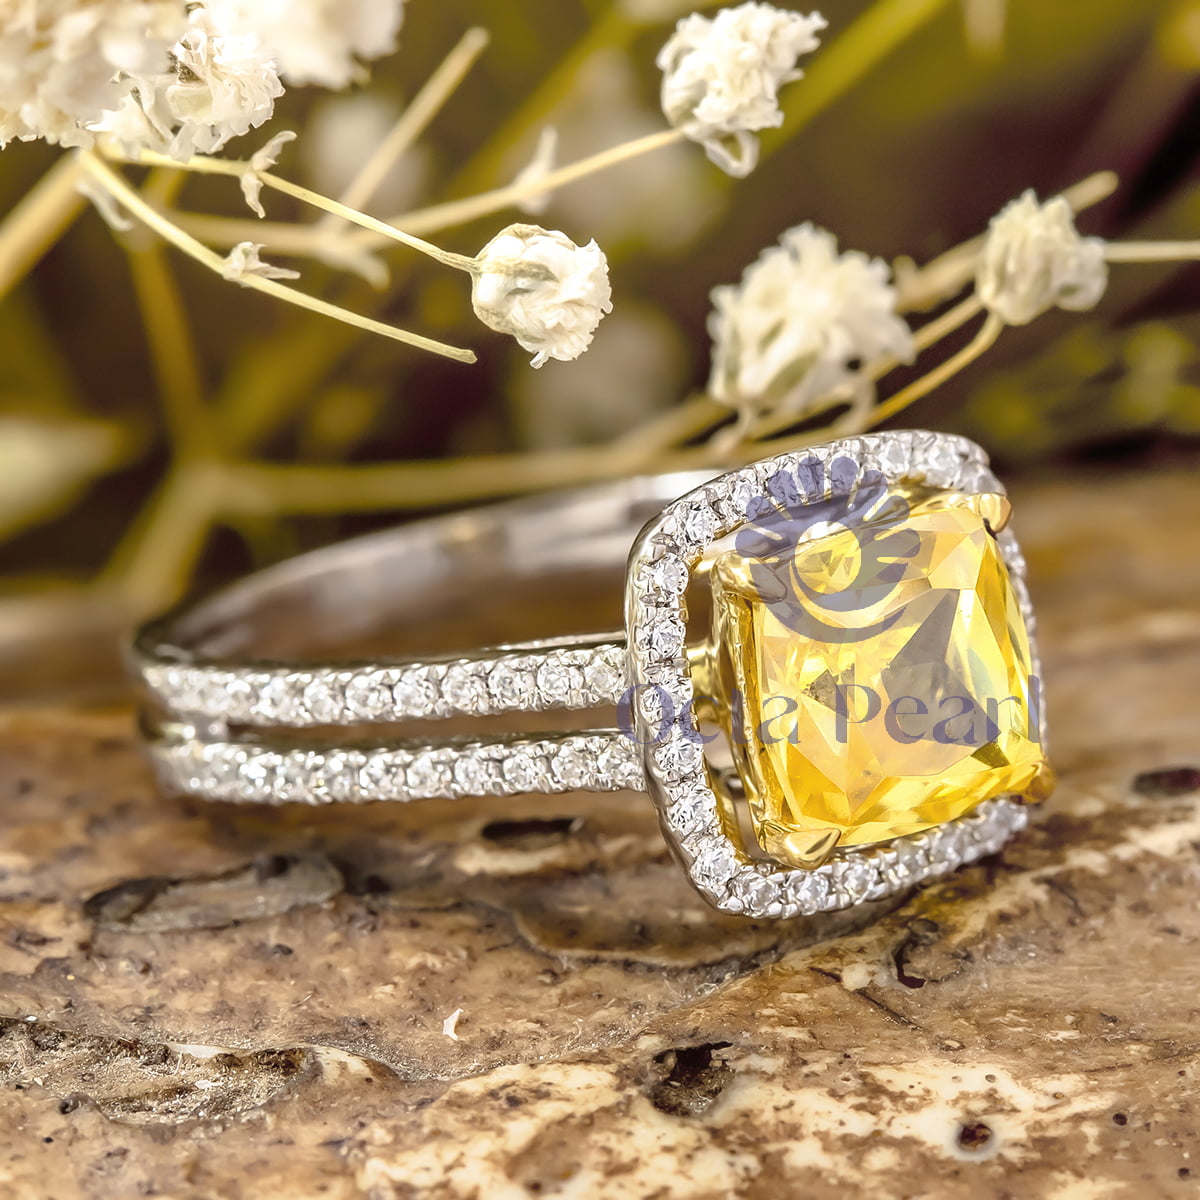 Cushion Cut Yellow CZ Stone Halo Double Band Engagement Ring For Girlfriends (3 1/5 TCW)